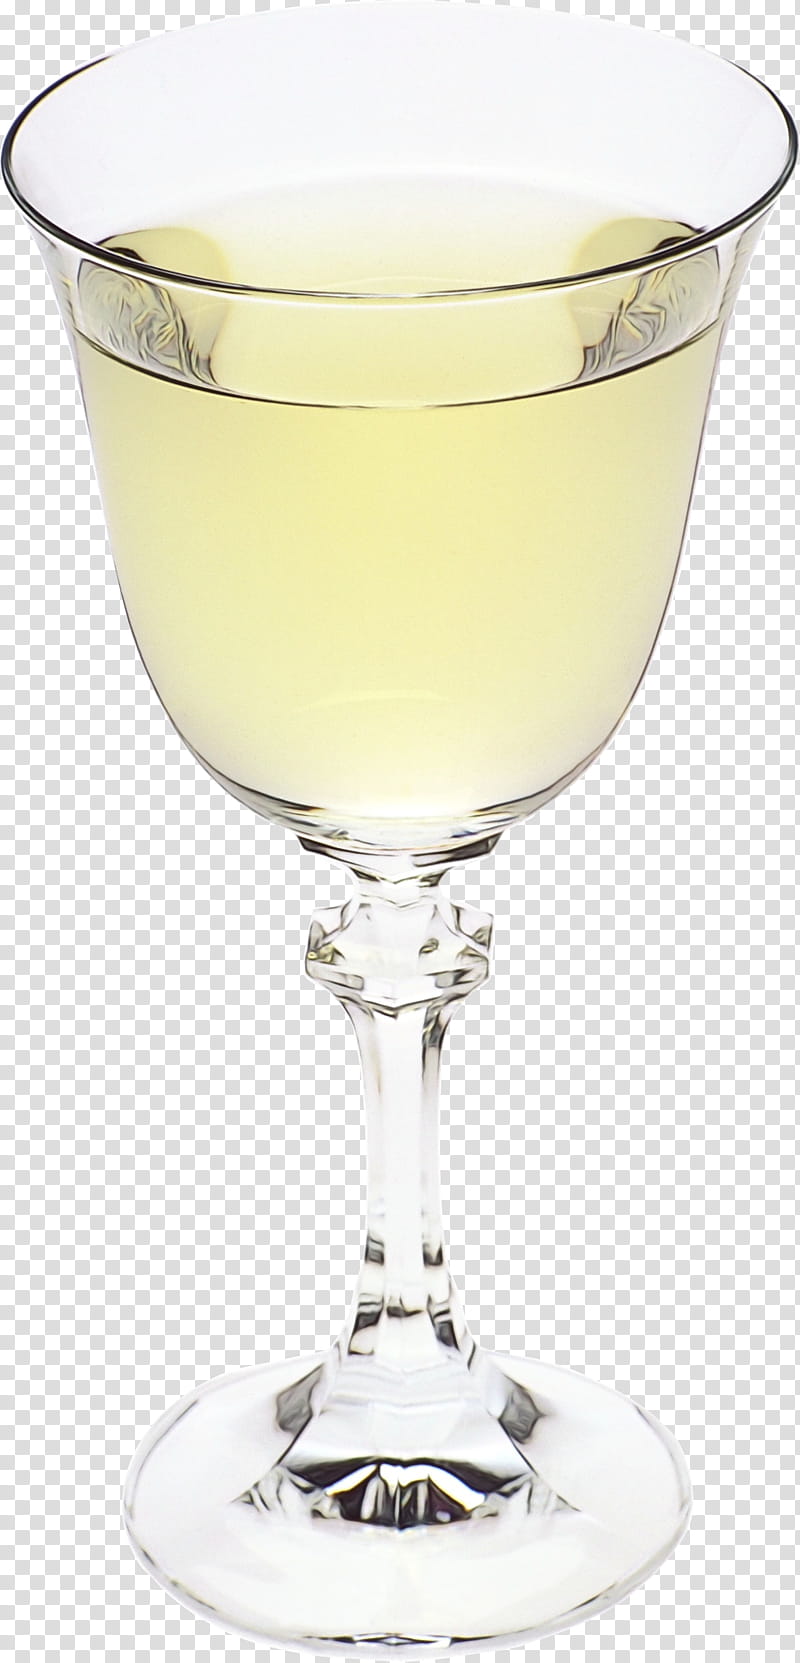 Champagne Bottle, Wine, Champagne Glass, Cup, Wine Glass, White Wine, Stemware, Decanter transparent background PNG clipart